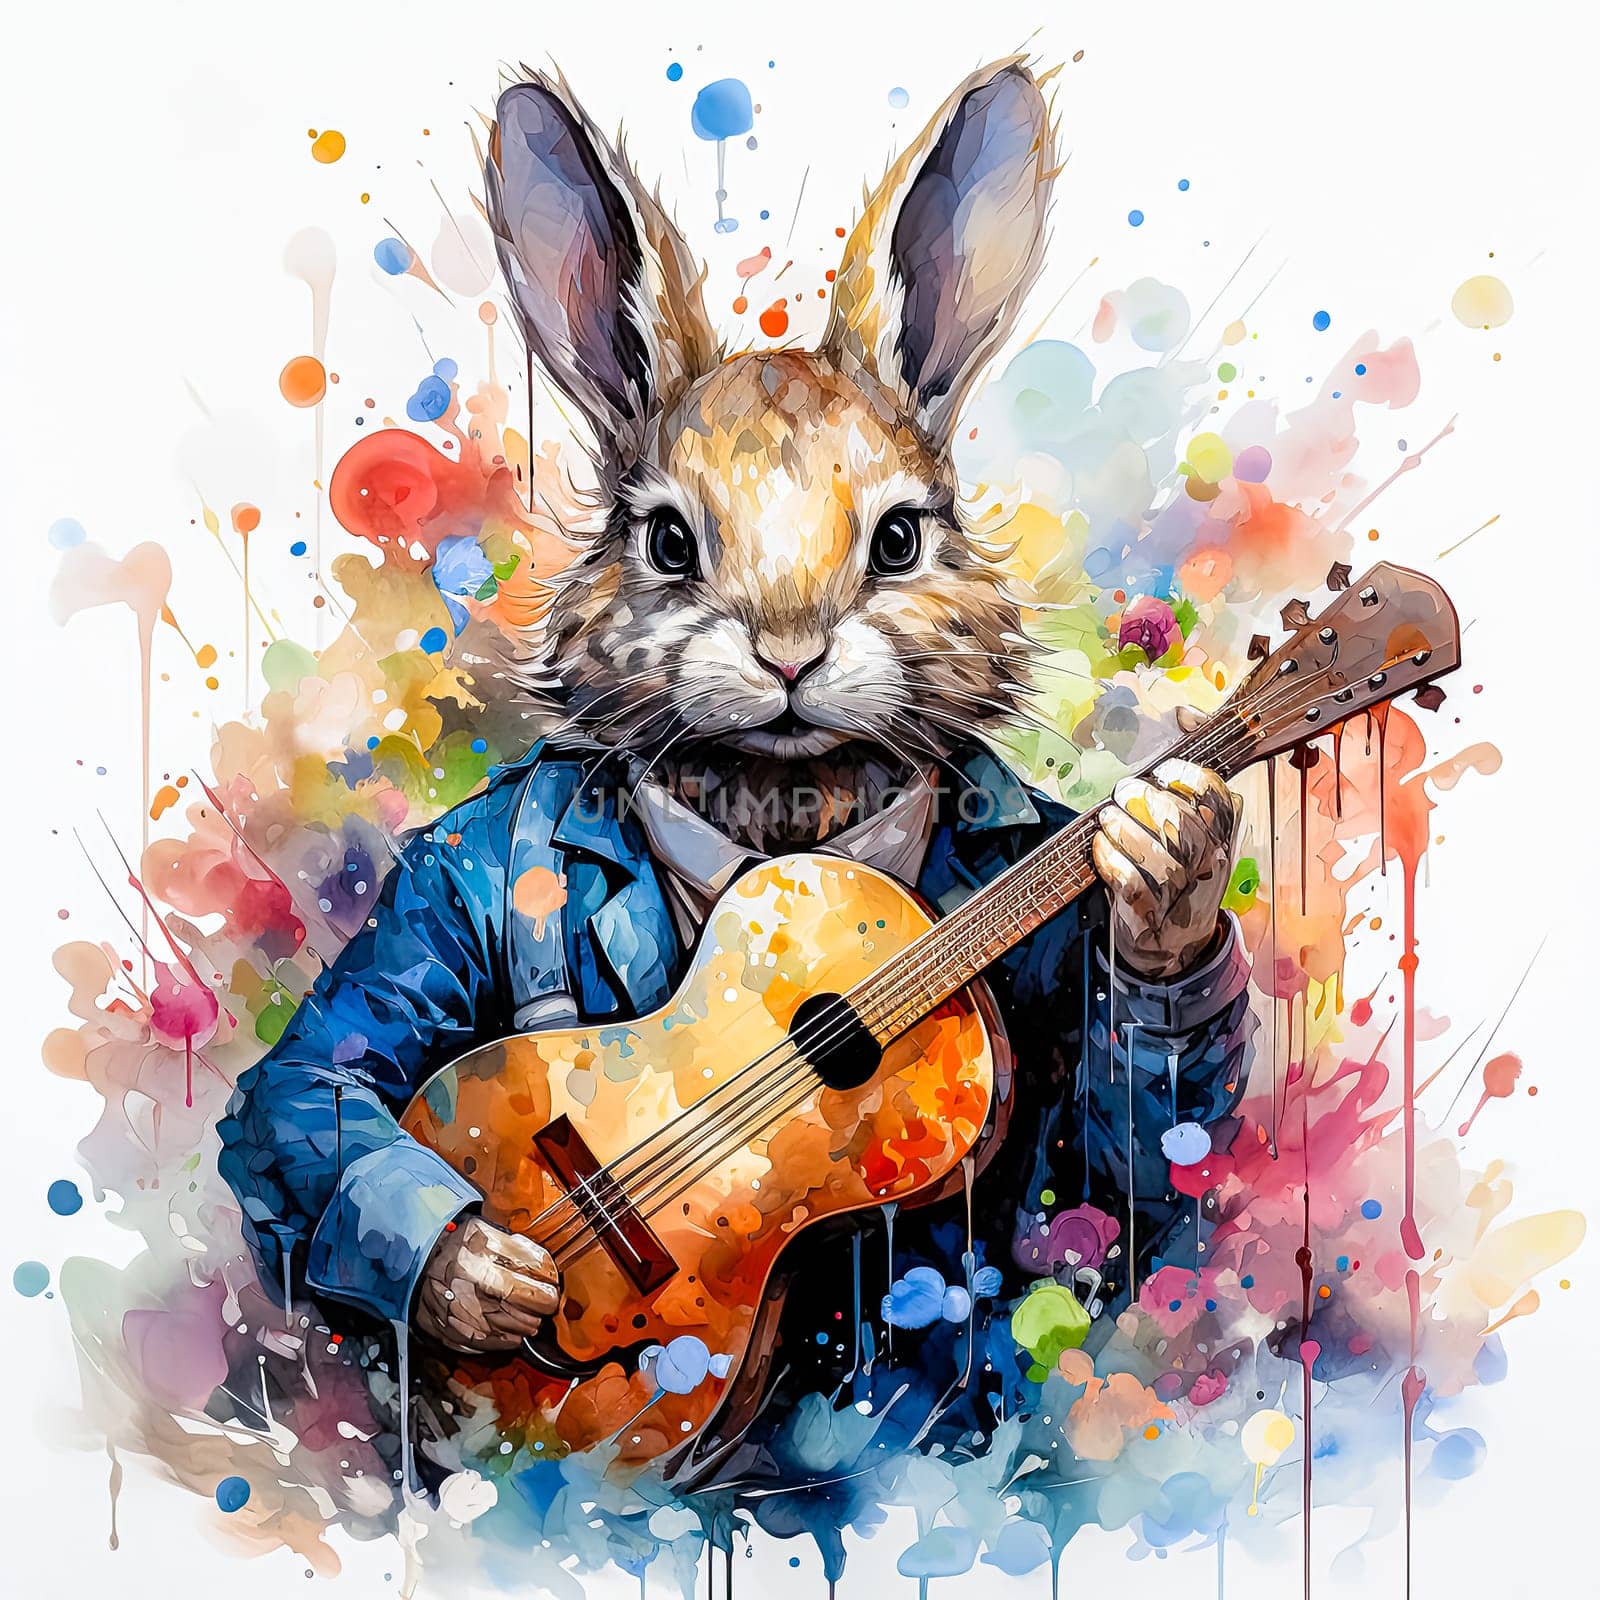 Rocker Bunny, a watercolor painting of a musical bunny playing a guitar, bringing fun and creativity to the visuals.